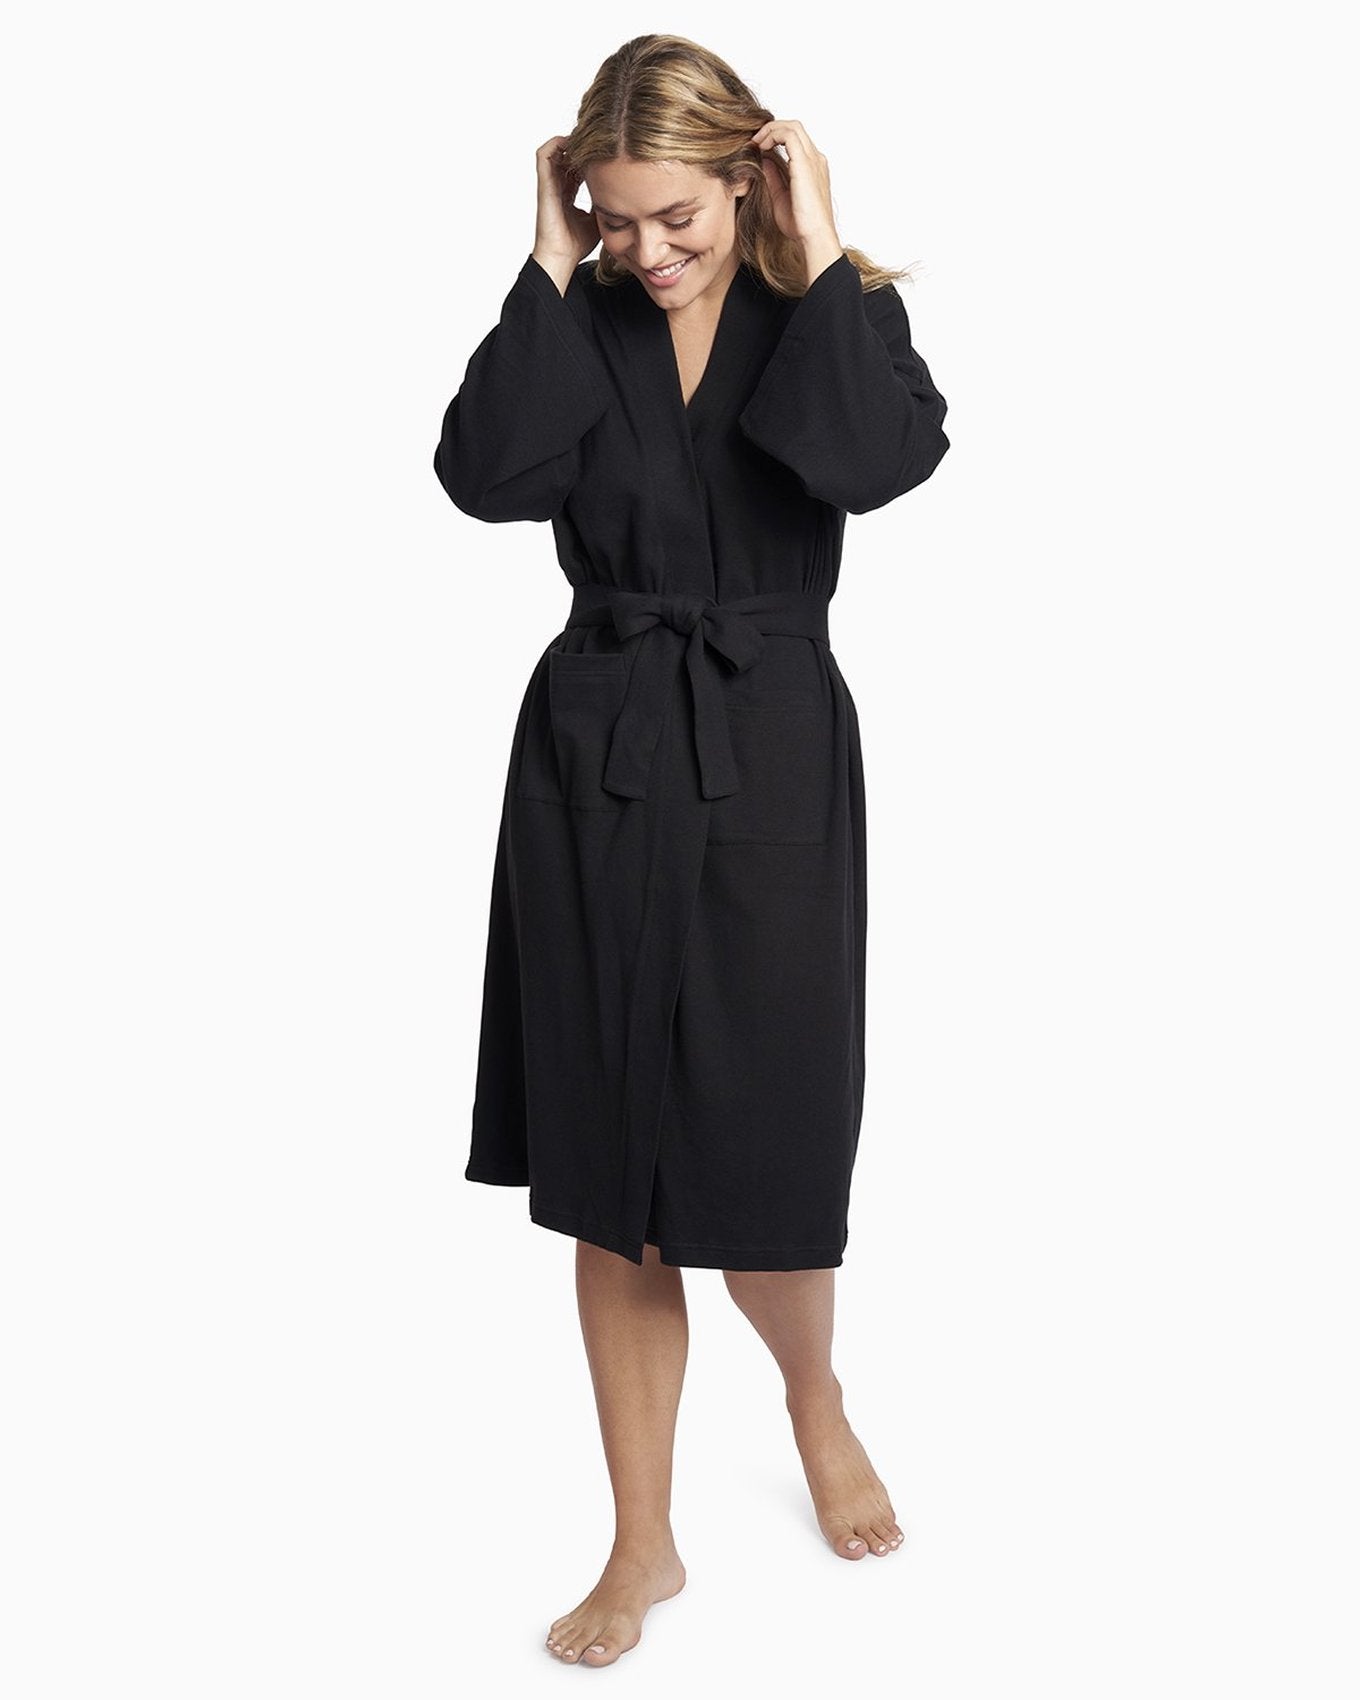 YesAnd Organic Knit Robe Knit Robe in color Jet Black and shape robe